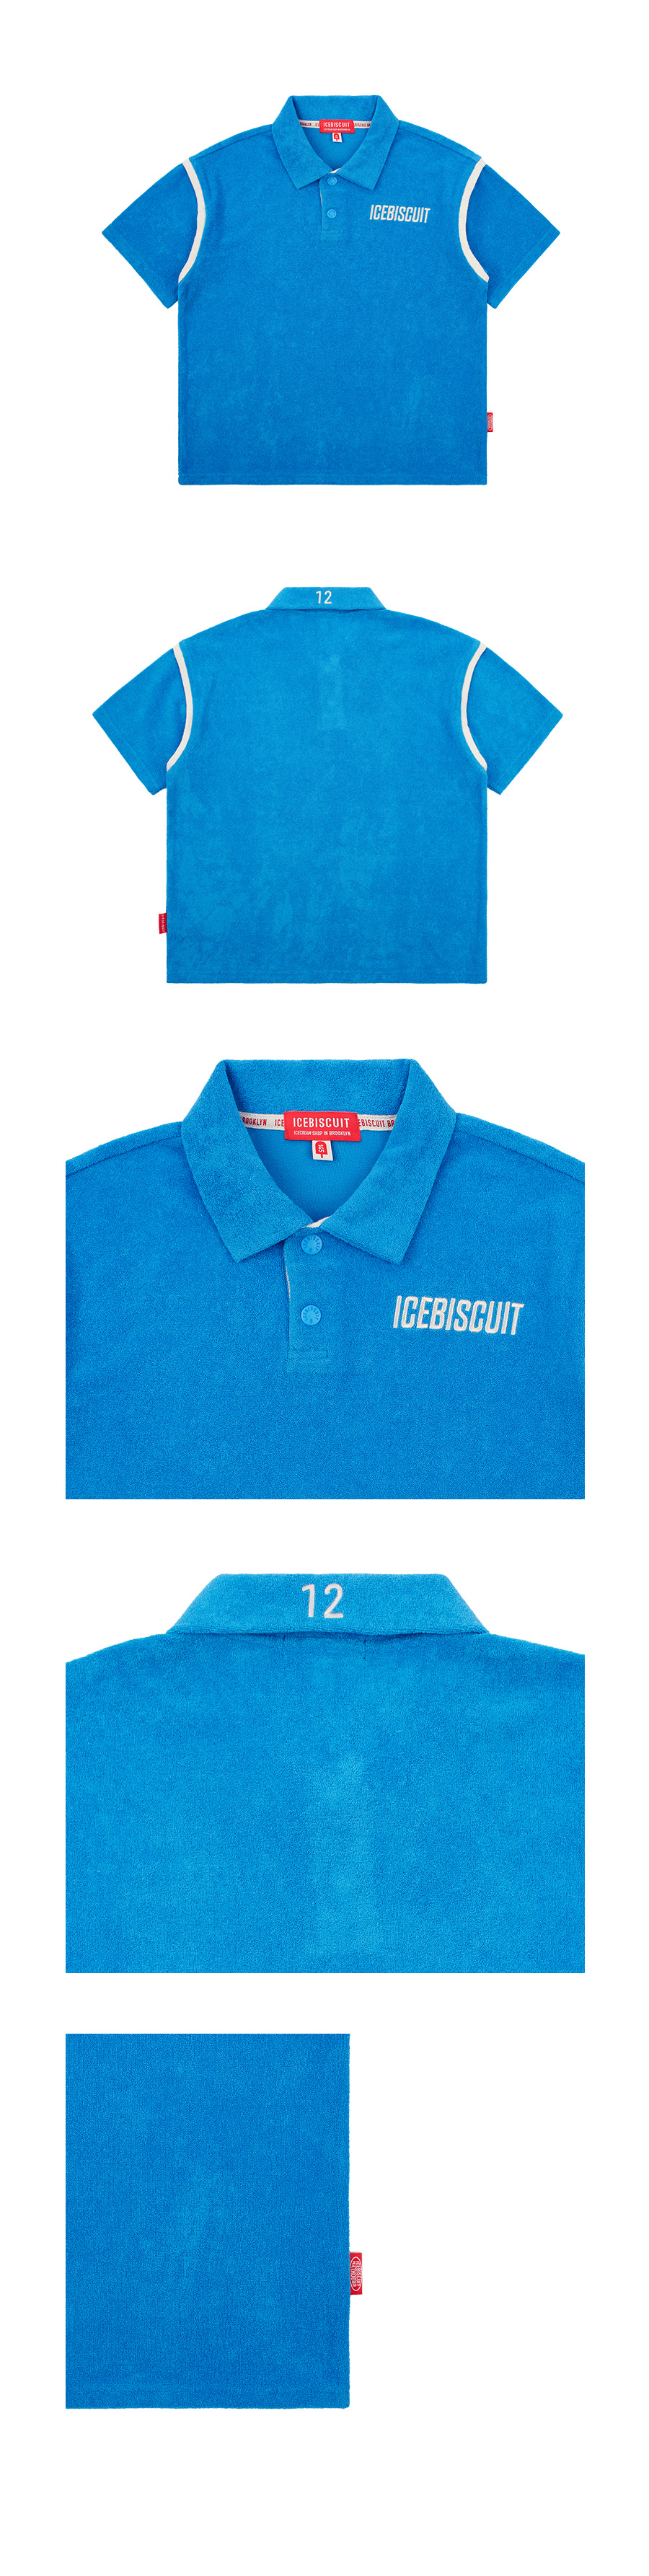 Icebiscuit point binding terry t-shirt 상세 이미지